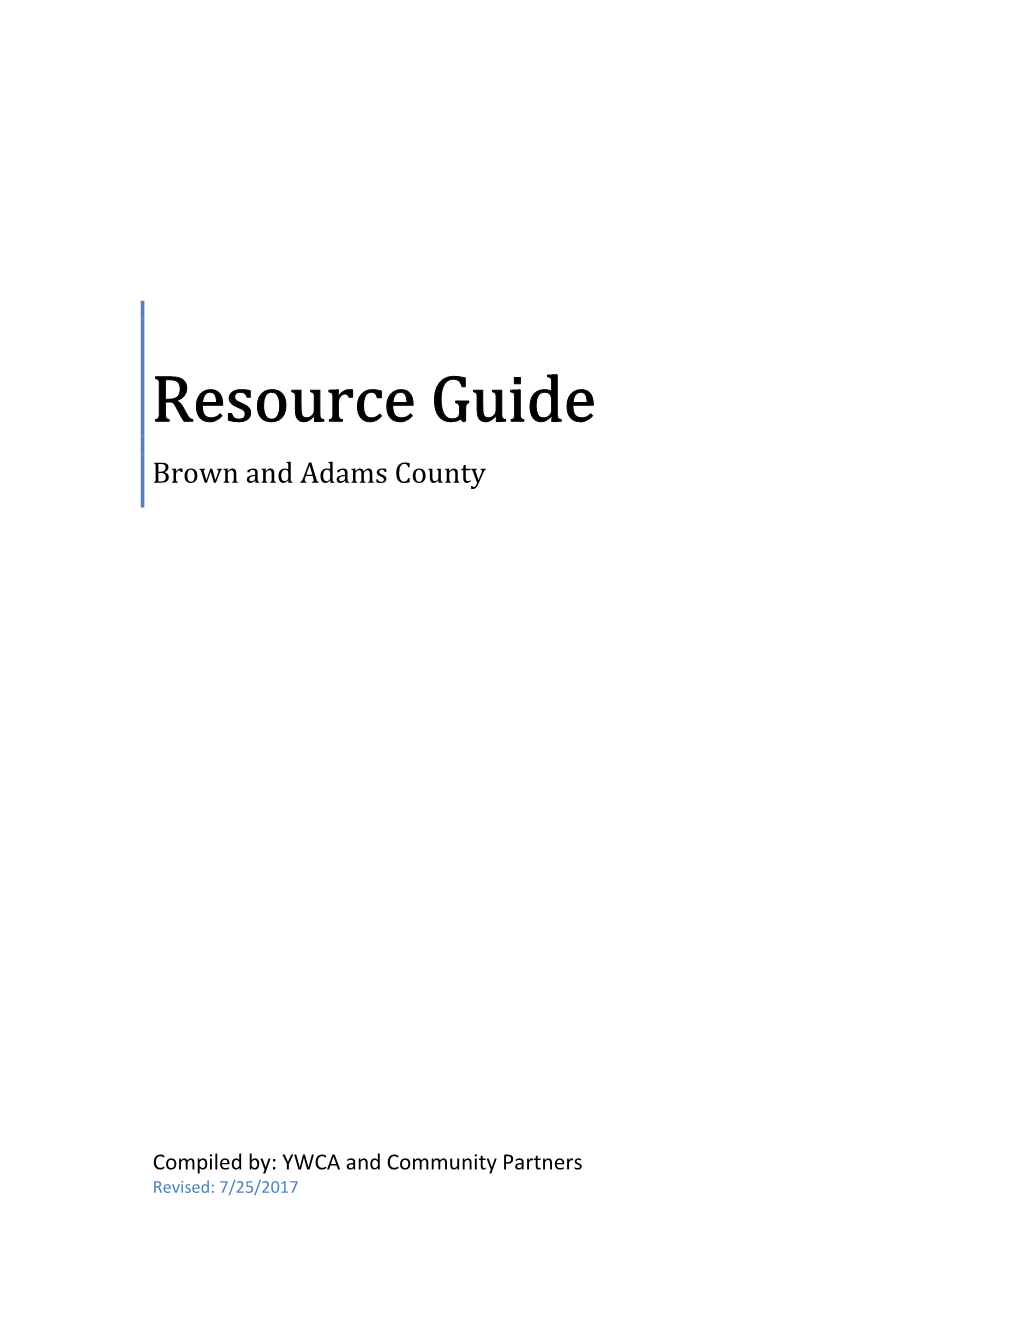 Brown and Adams County Resource Guide Was Developed by YWCA with the Help of Brown and Adams County Community Partners